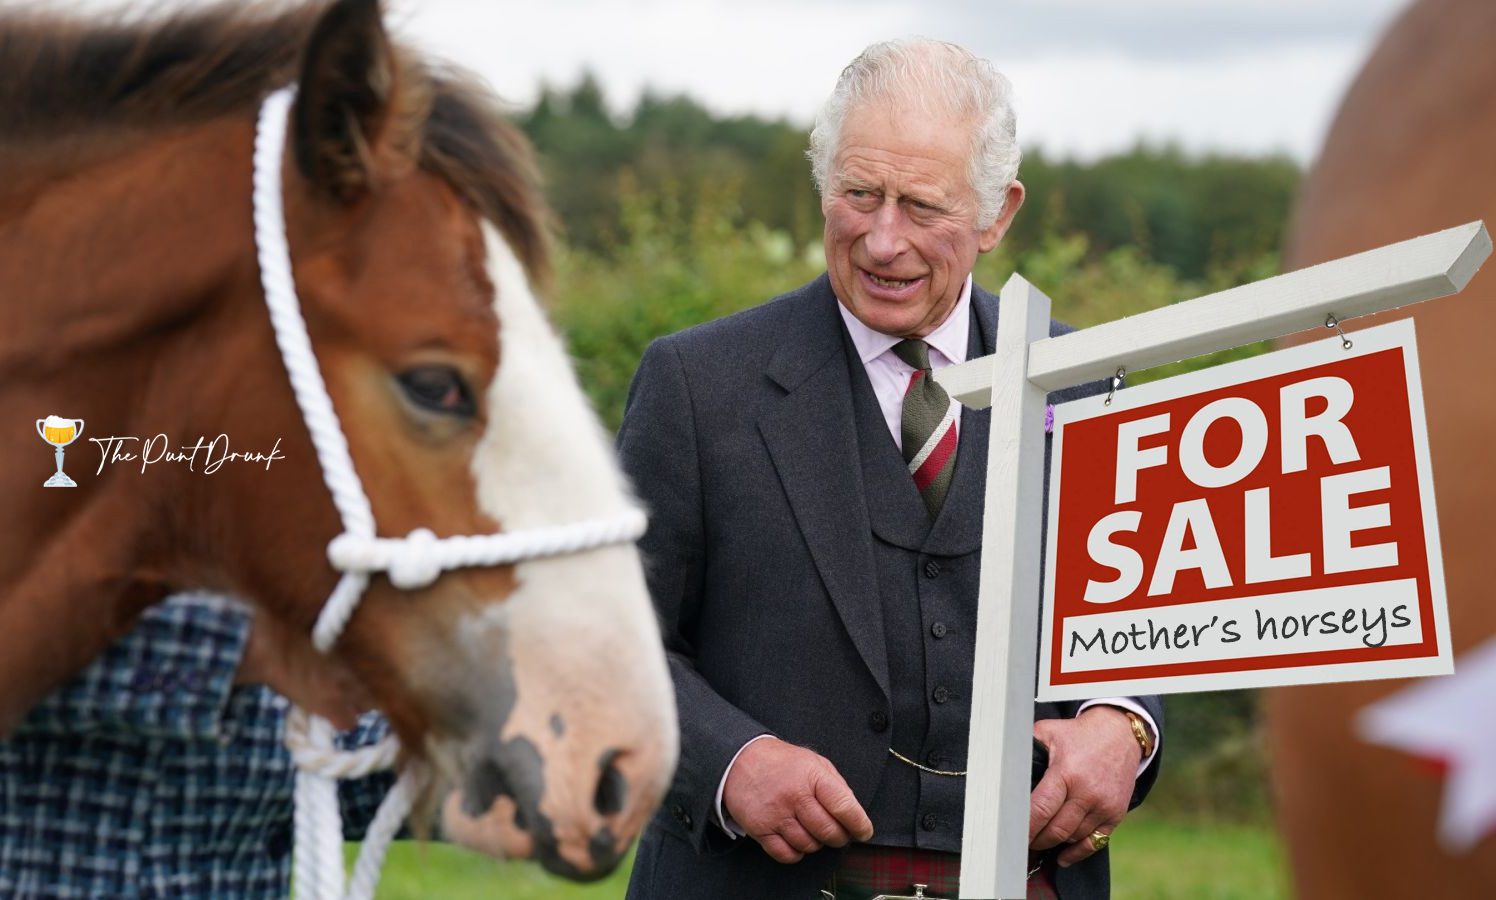 King Charles selling off Queen's horses